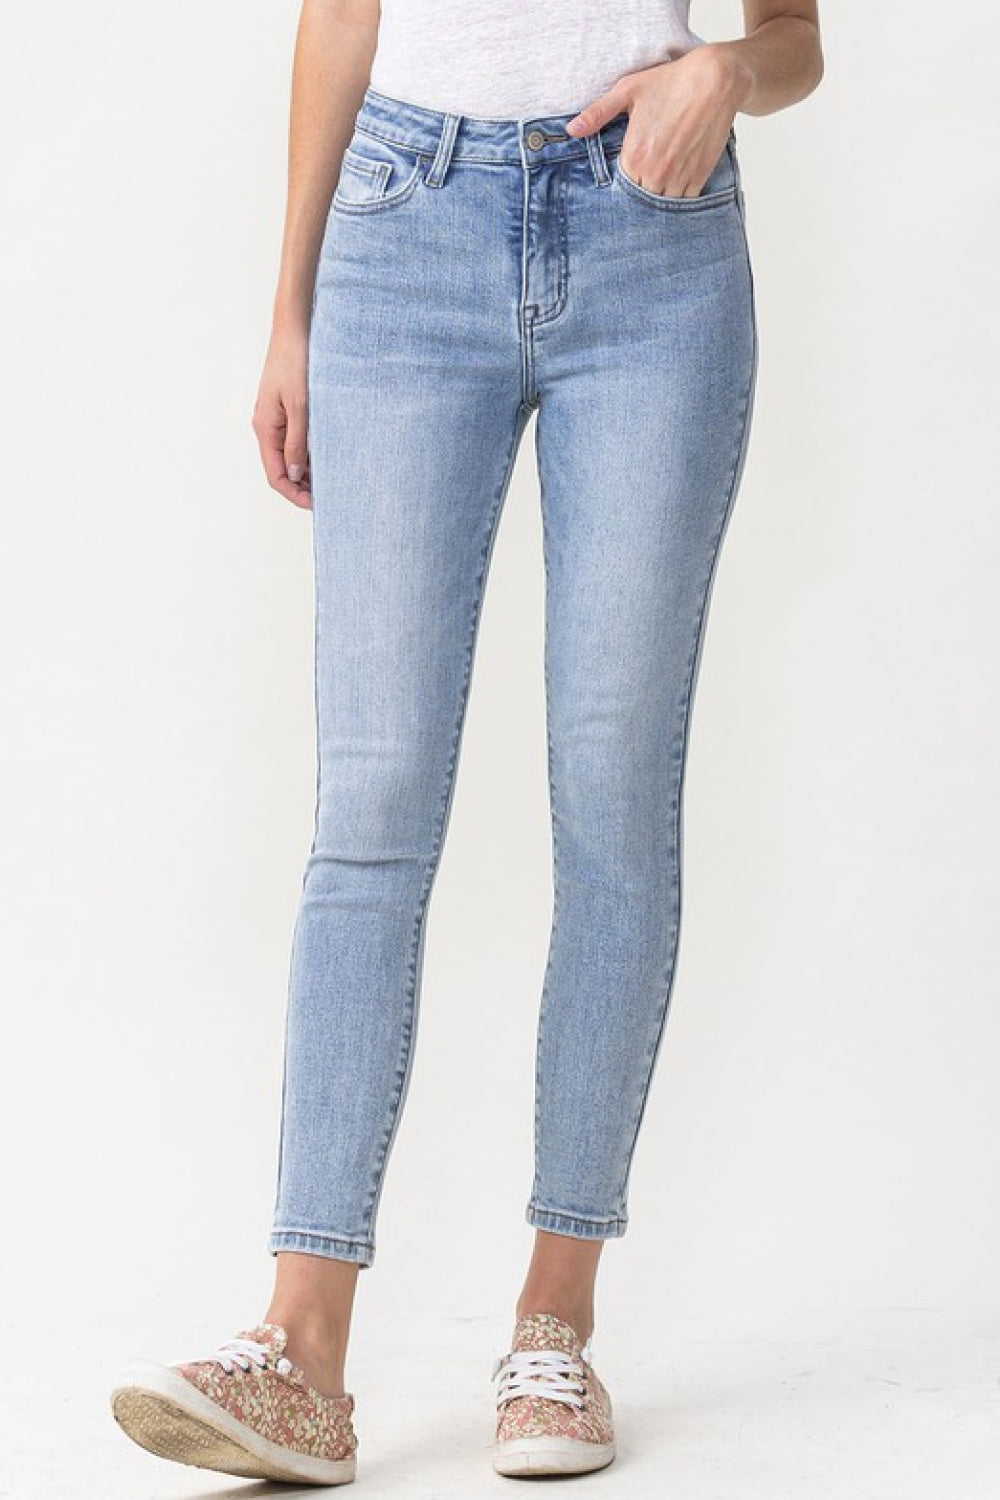 The Daily Grind High Rise Crop Skinny Jeans by Lovervet